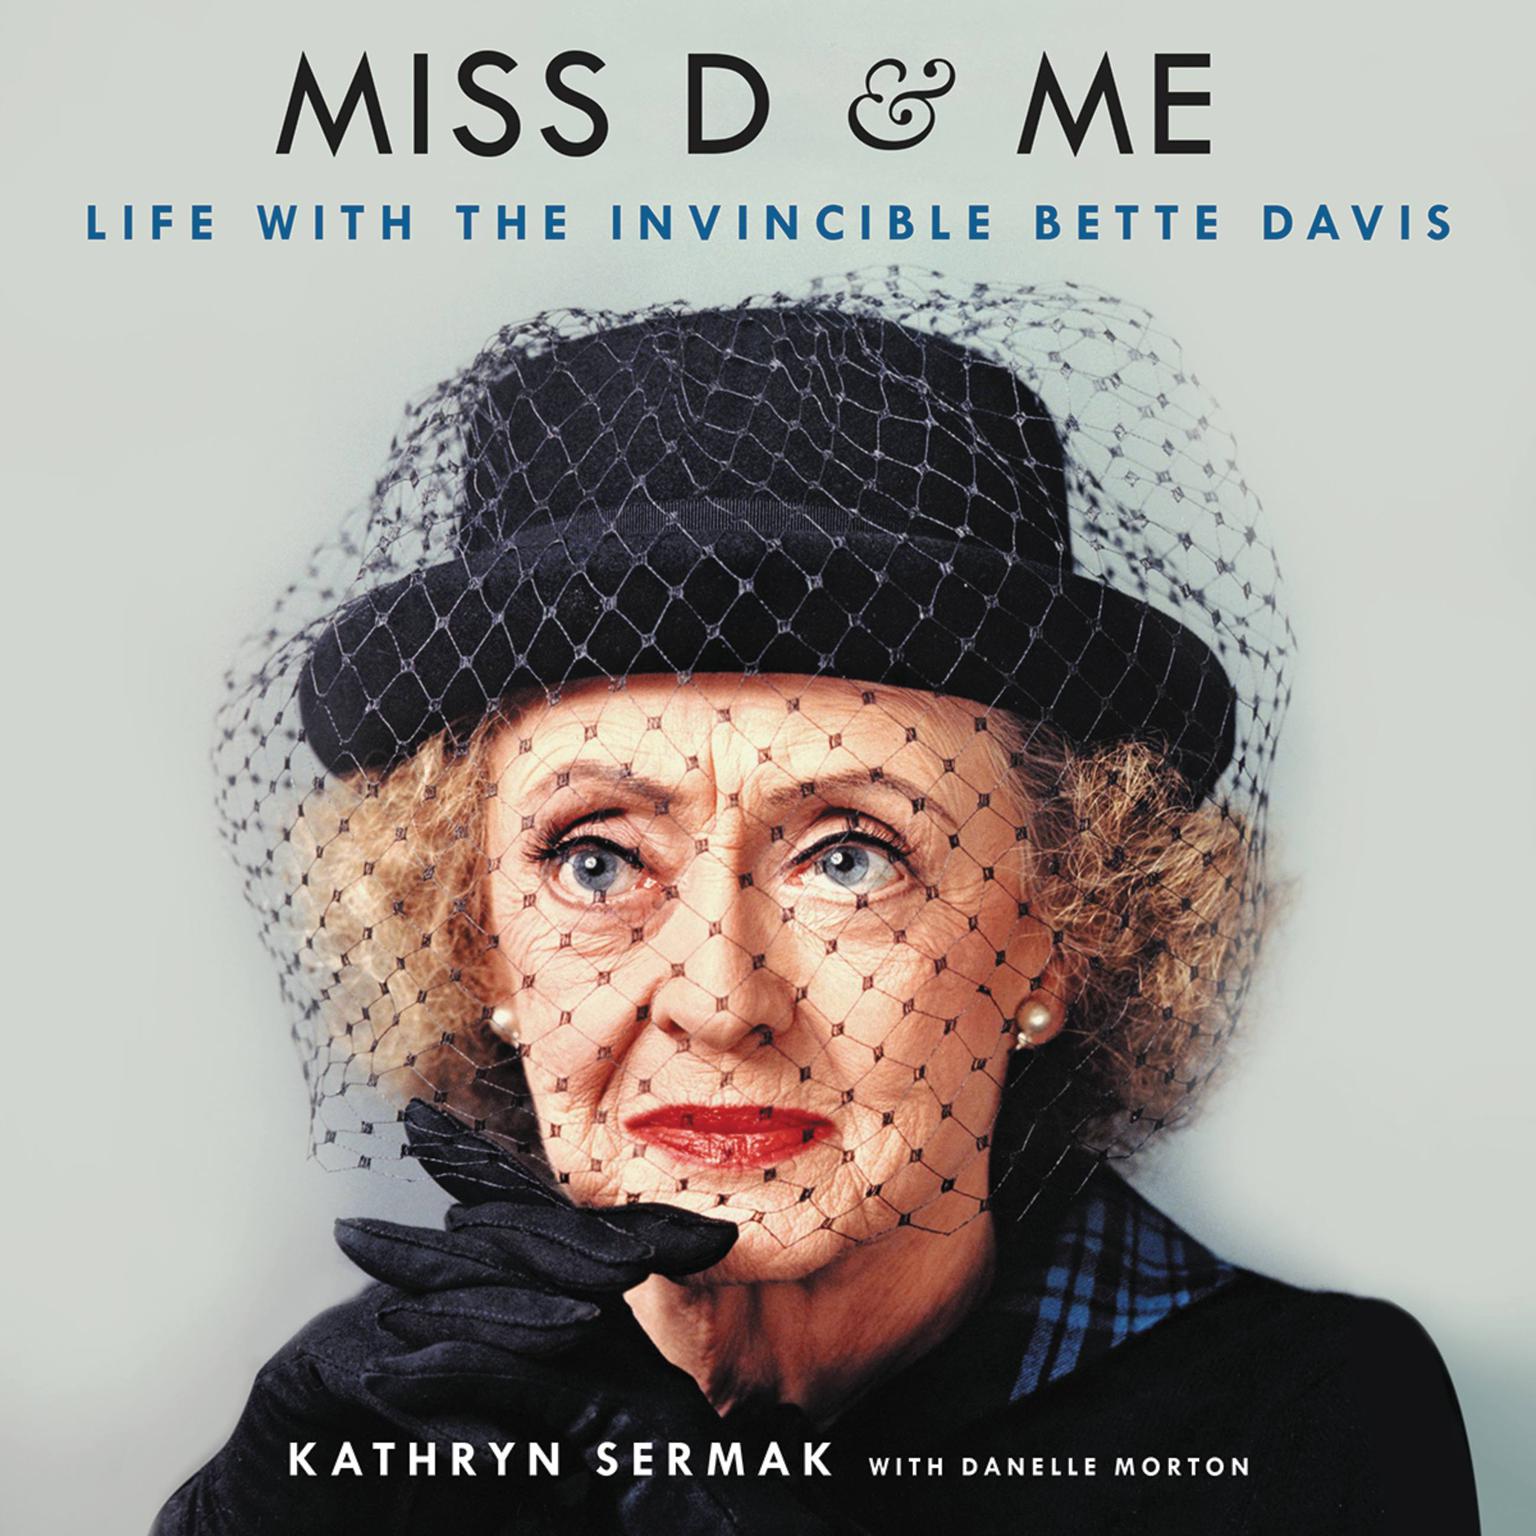 Miss D and Me: Life with the Invincible Bette Davis Audiobook, by Kathryn Sermak